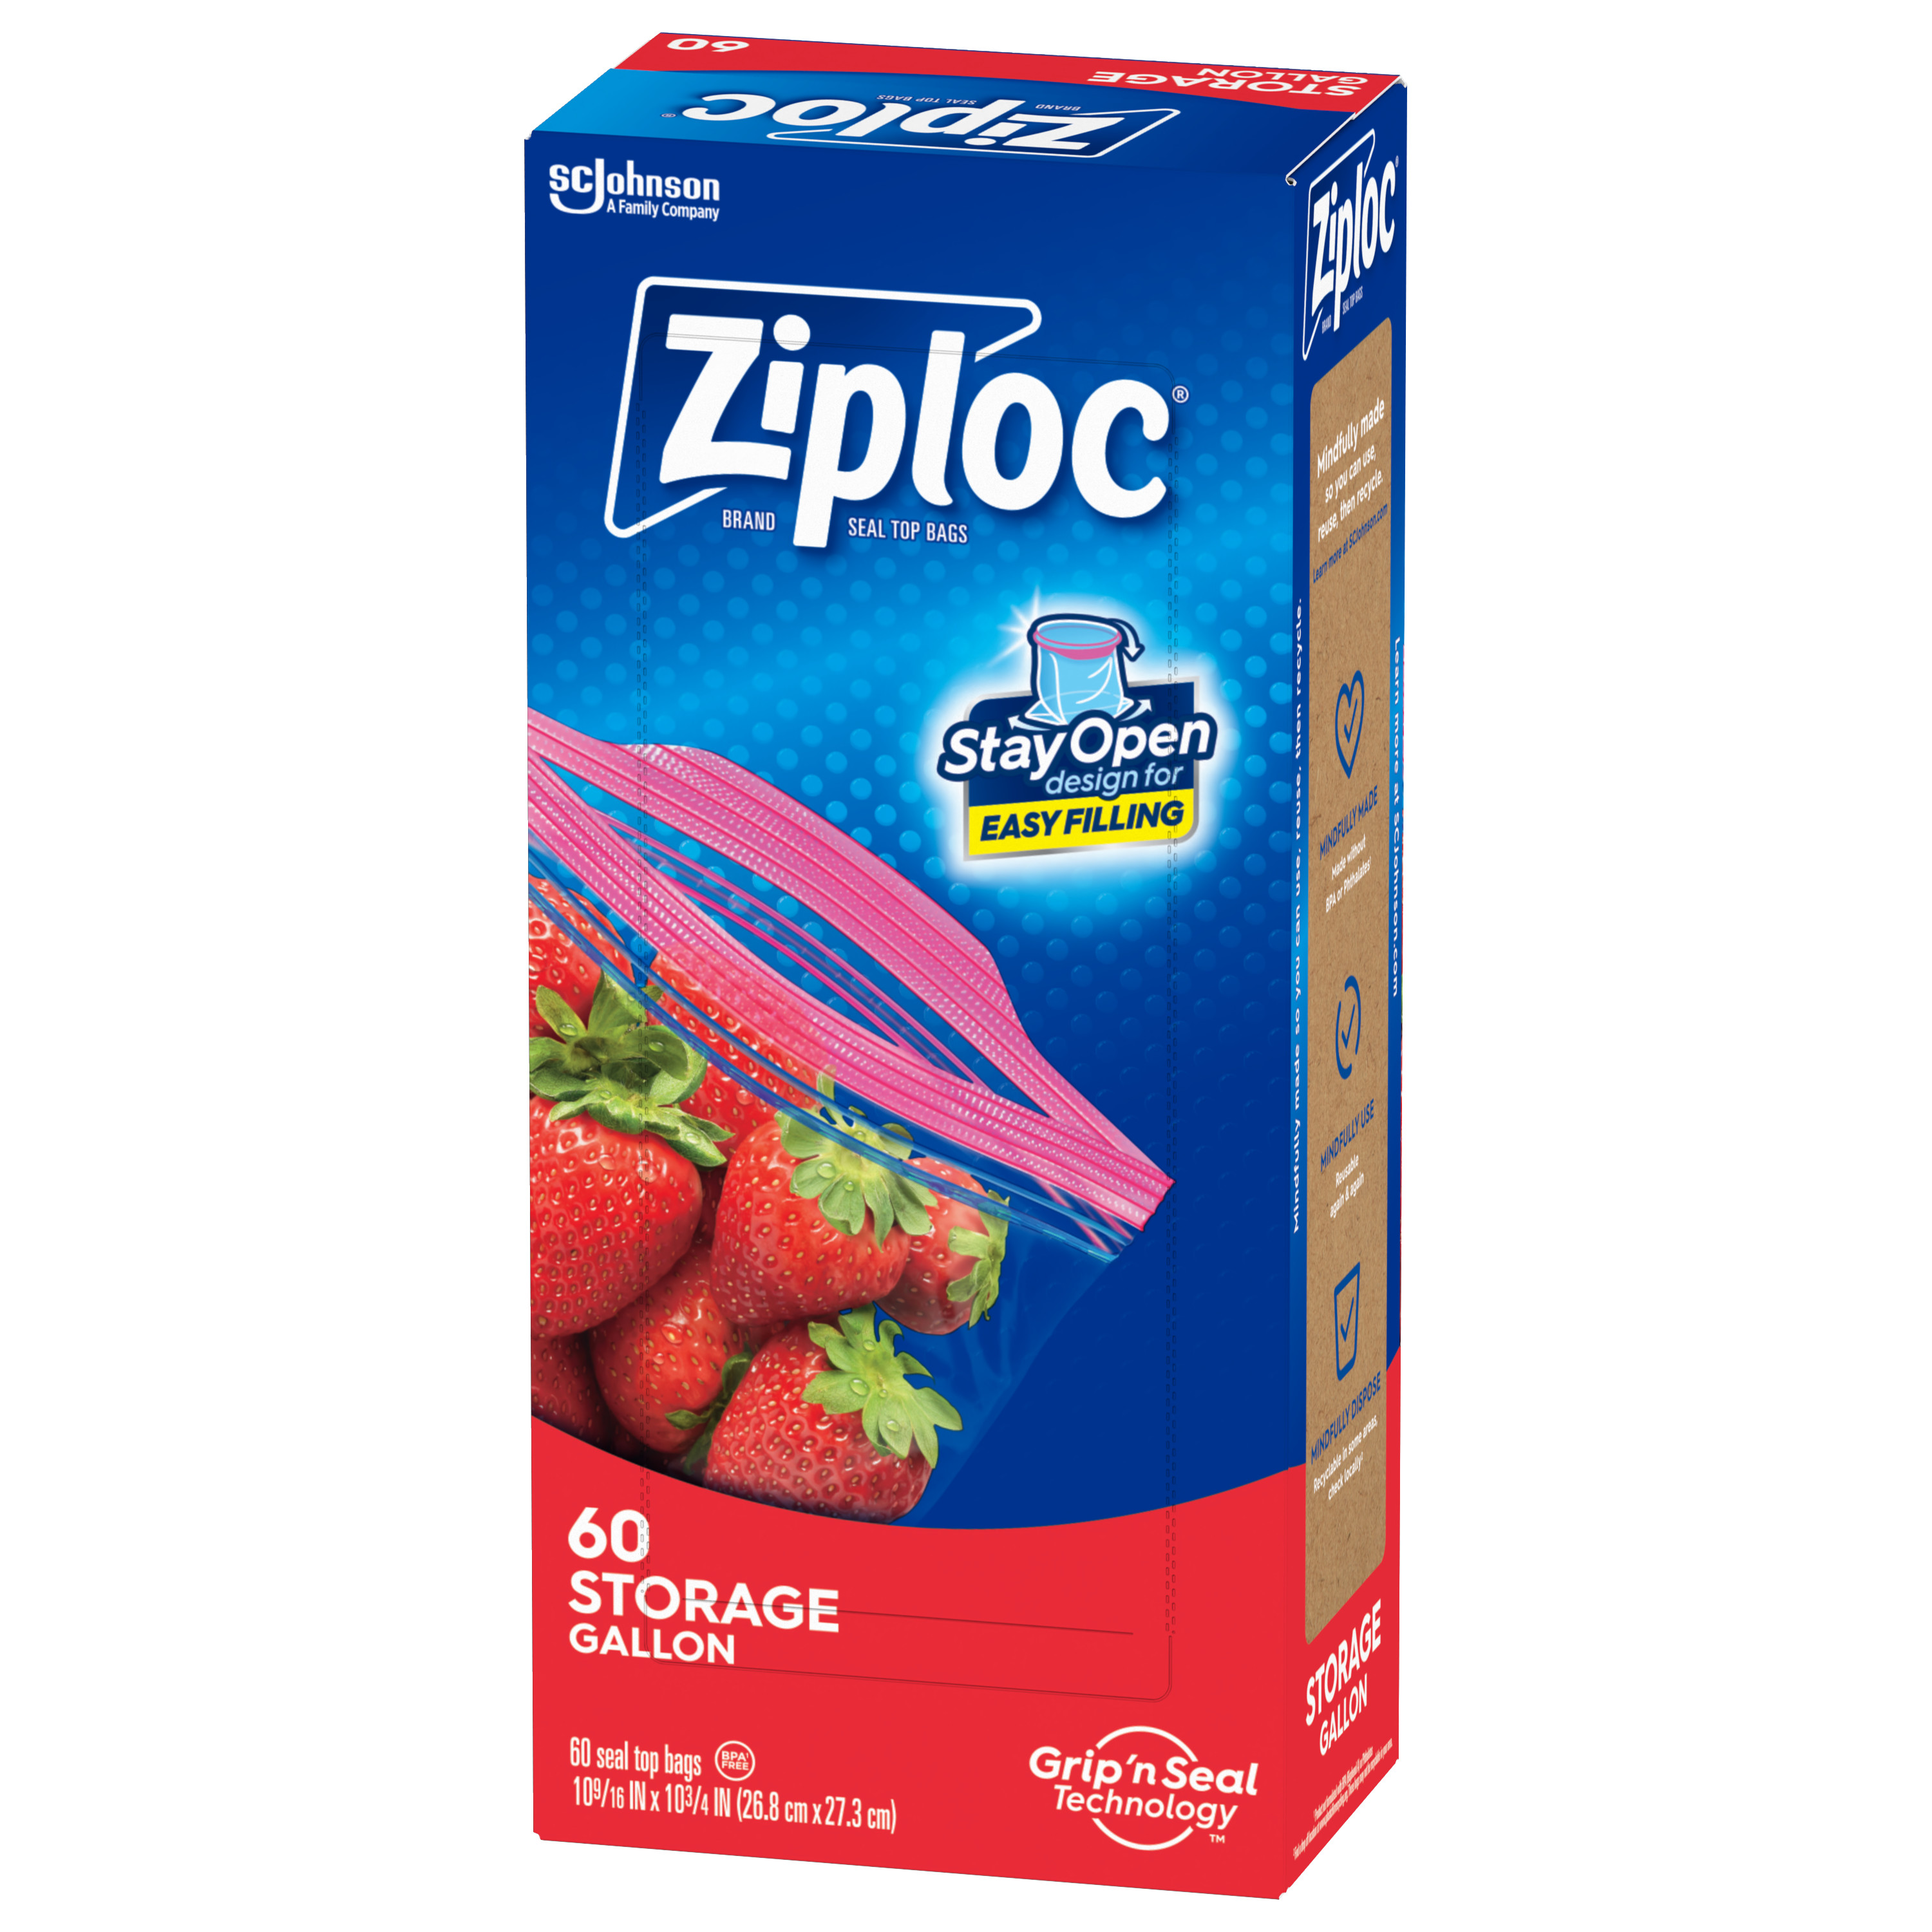 Ziploc® Brand Gallon Storage Bags with Stay Open Technology, 60 Count - image 15 of 19